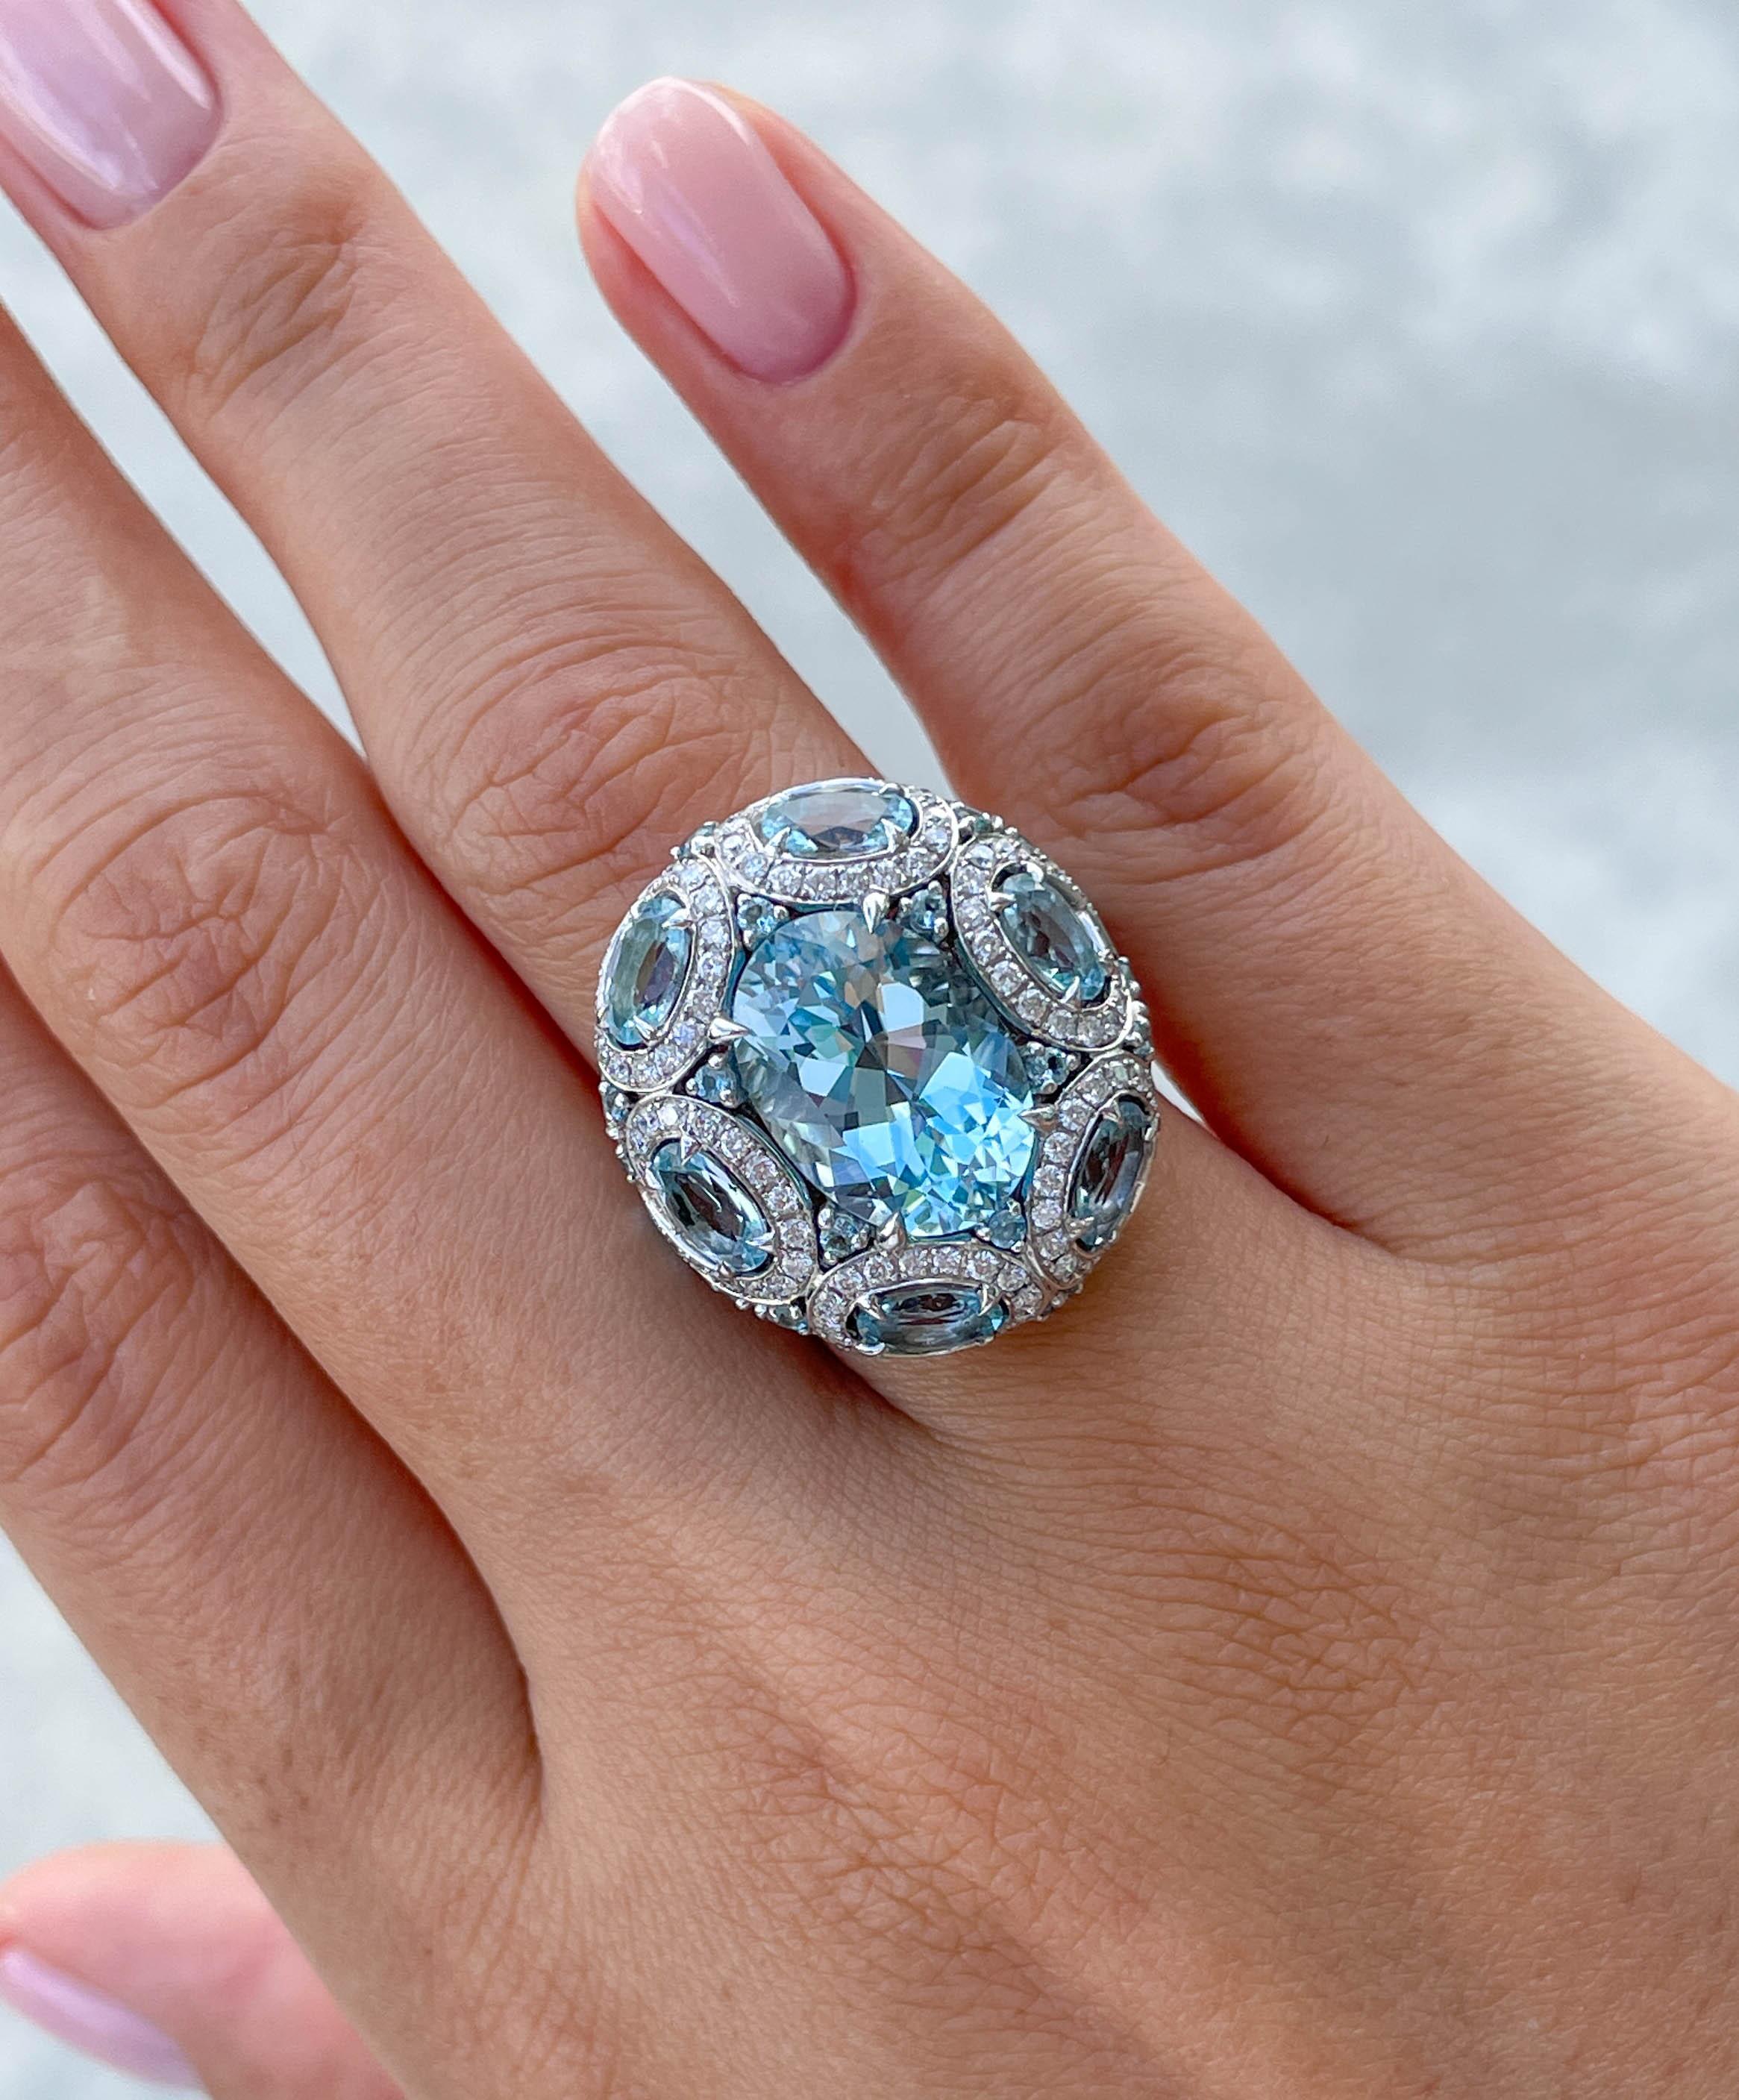 Jay Feder Blue Topaz and Diamond ring in 18k White gold with Oval shaped Blue Topaz in the center set with smaller oval shaped topaz around; estimated total weight is 1.44ctw.
Set with 36 Oval and round shaped Blue Topaz; estimated total weight is